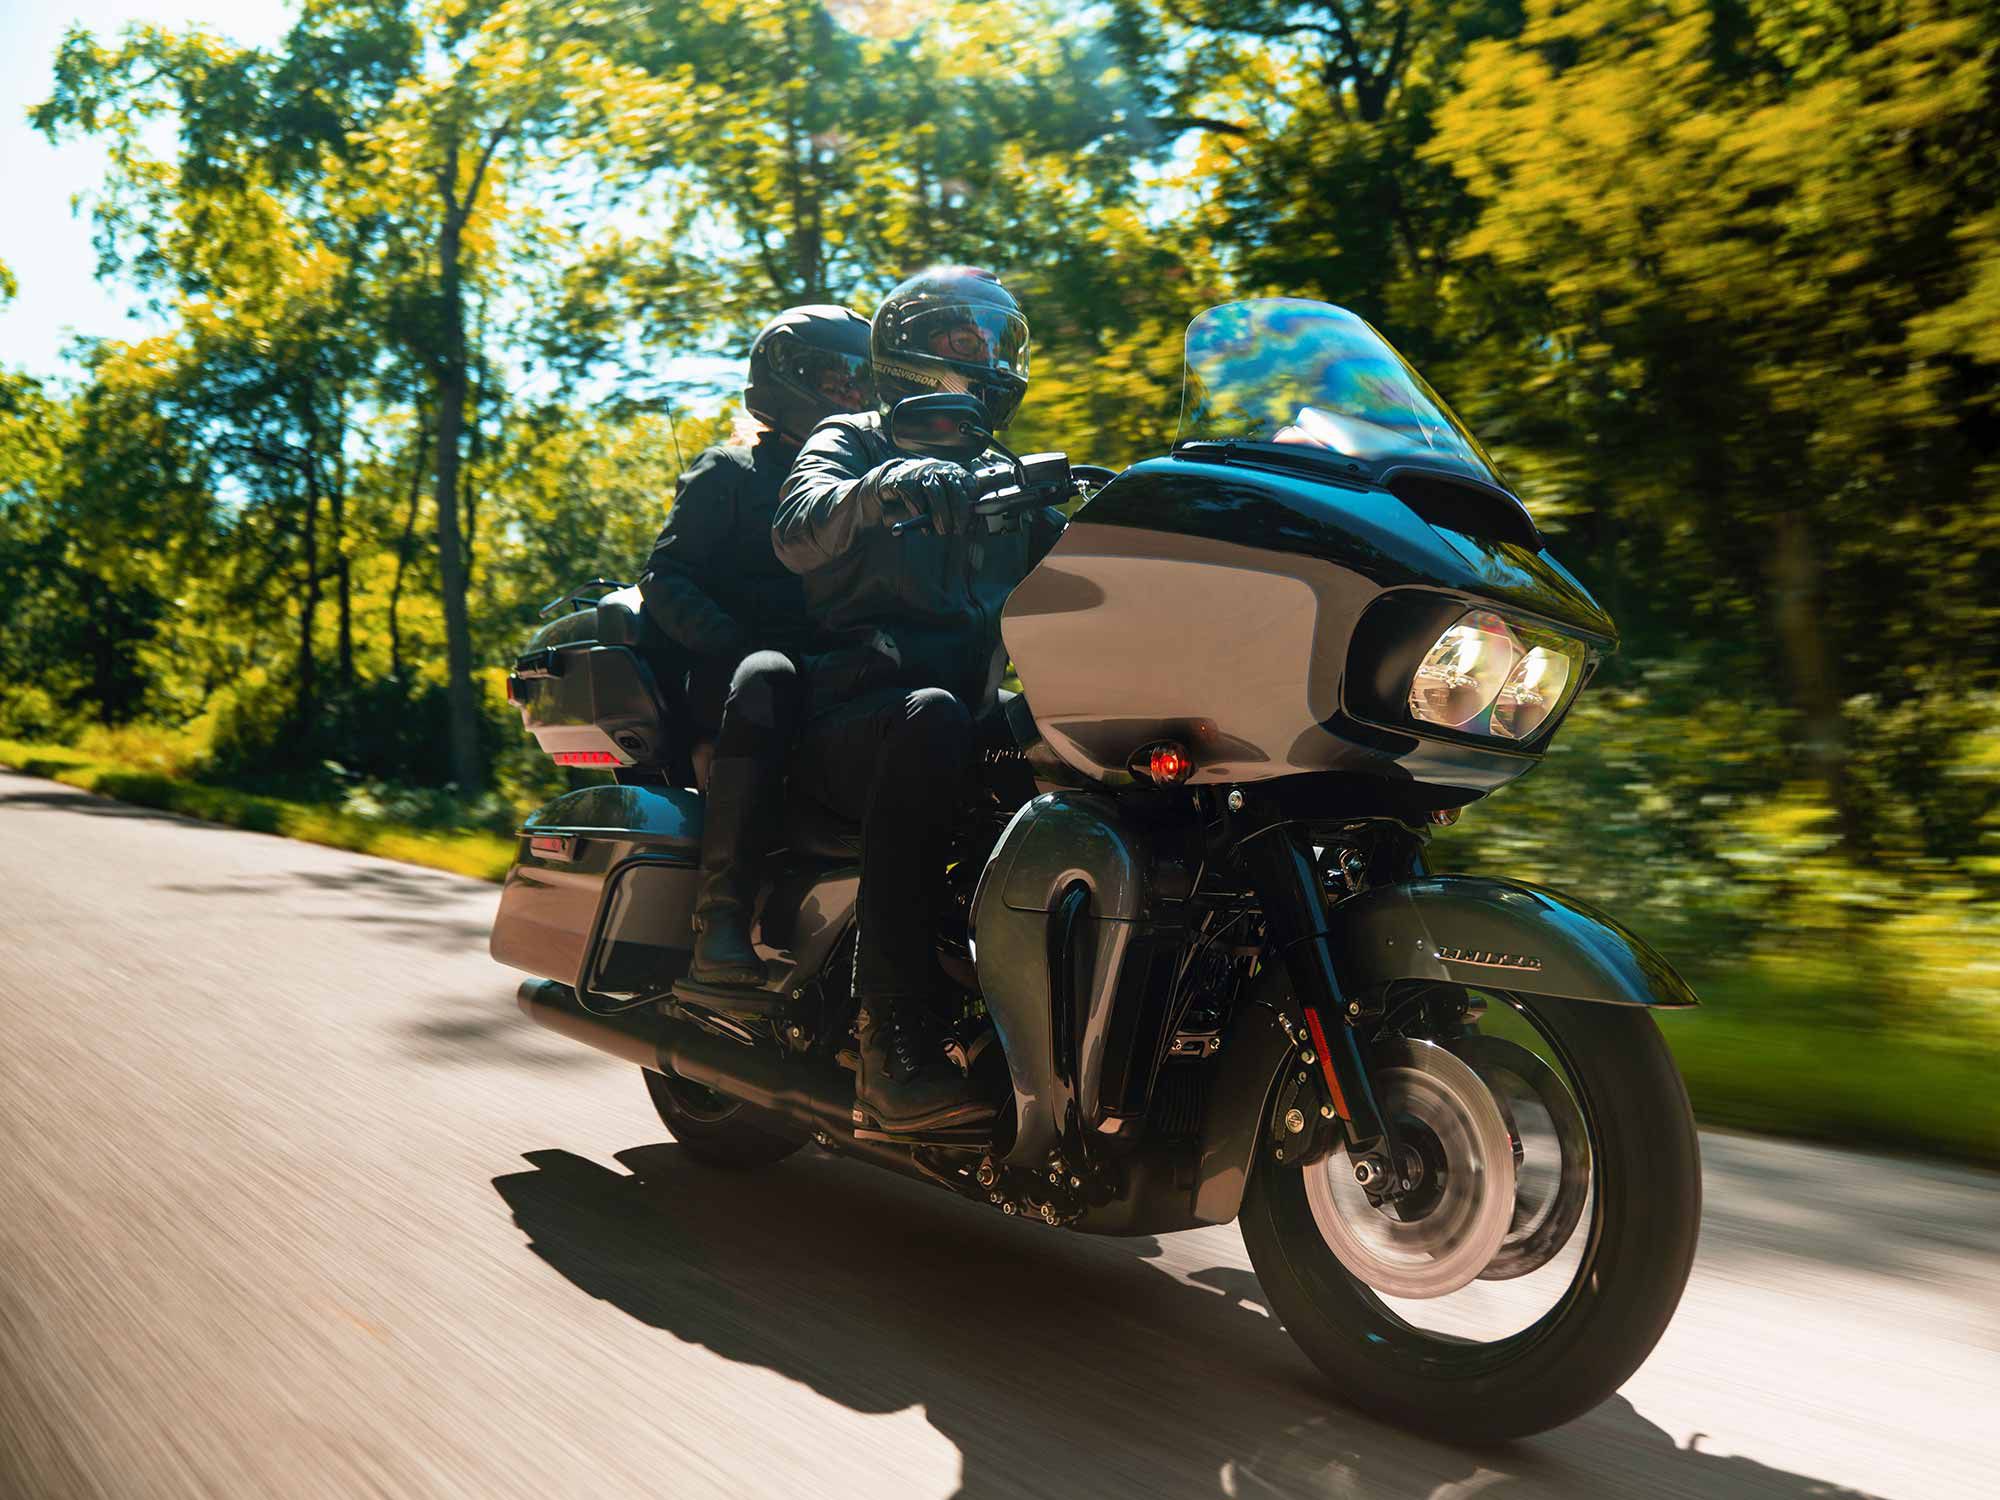 The Harley-Davidson Road Glide Limited is one of its best two-up options in its line.